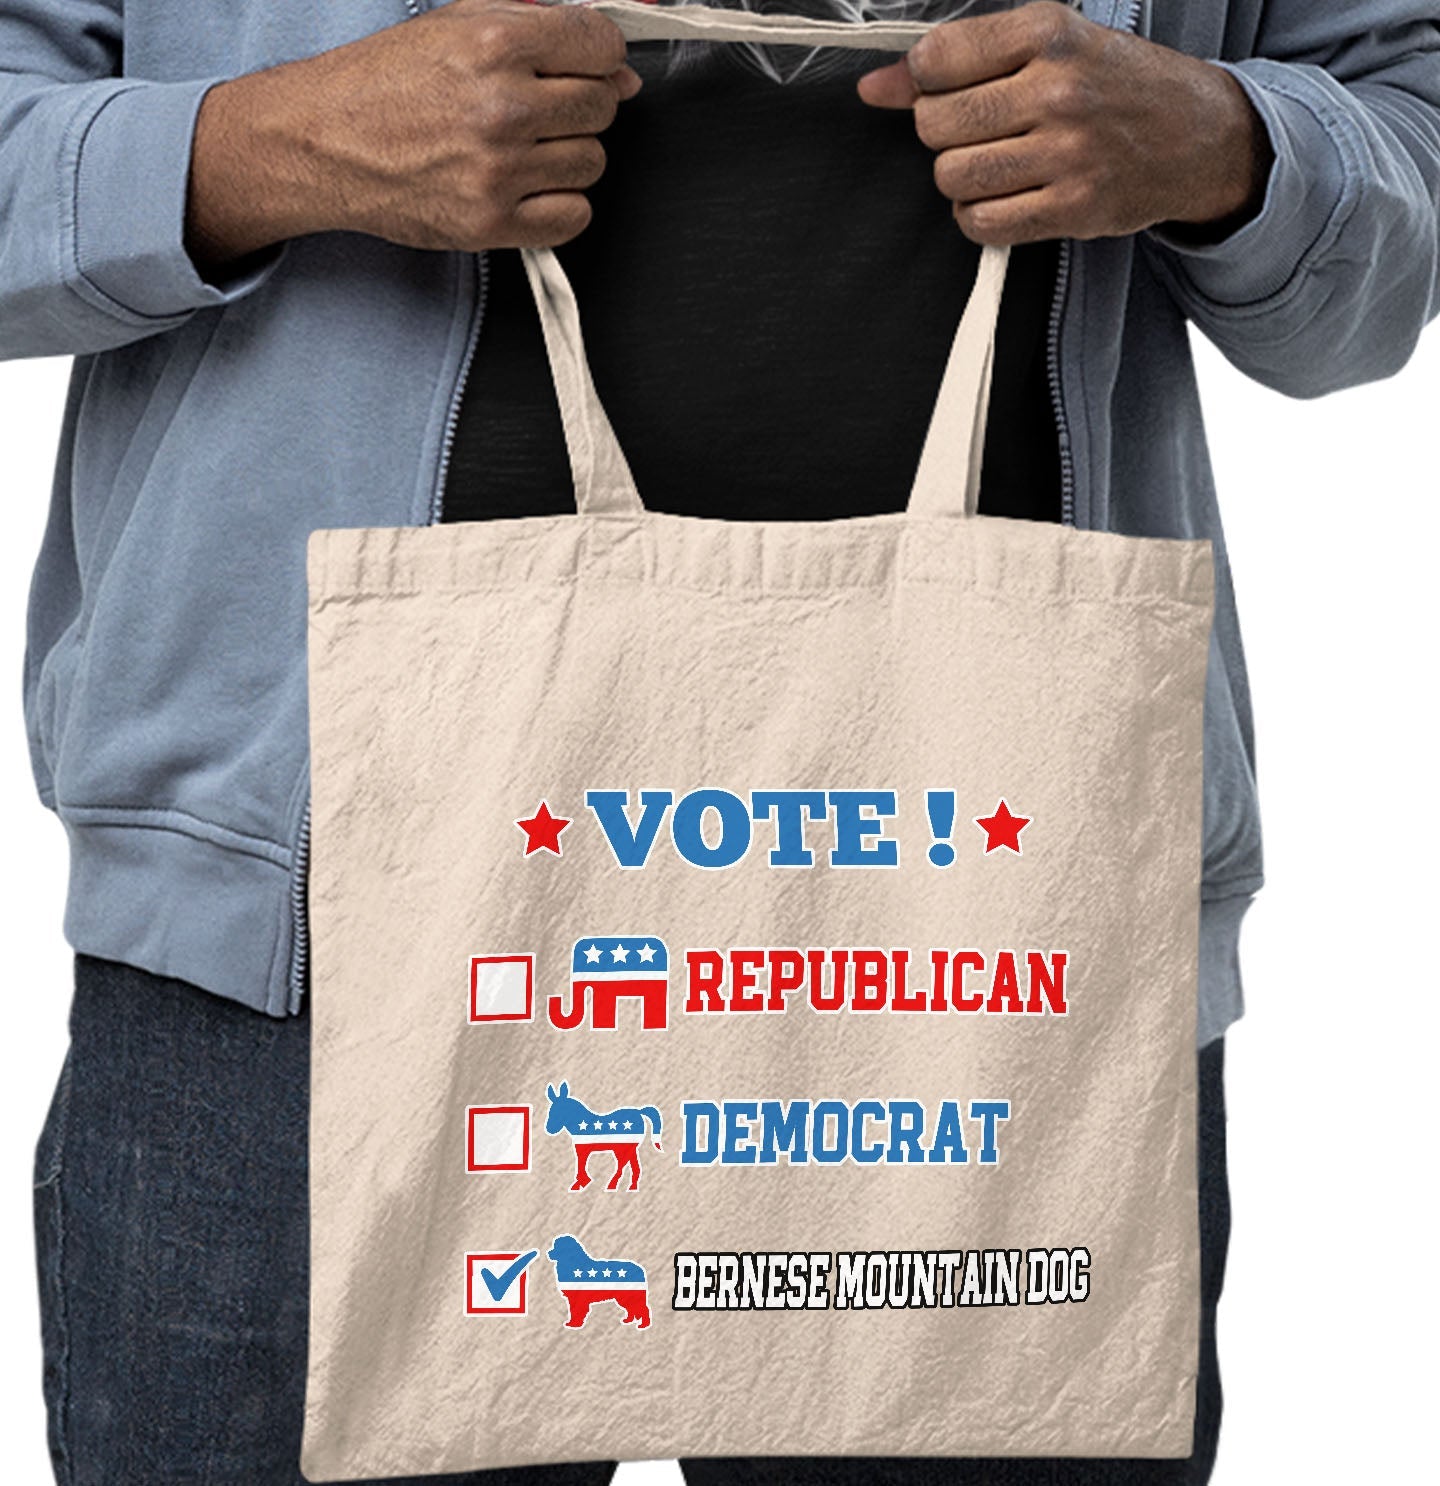 Vote for the Bernese Mountain Dog - Cotton Canvas Tote